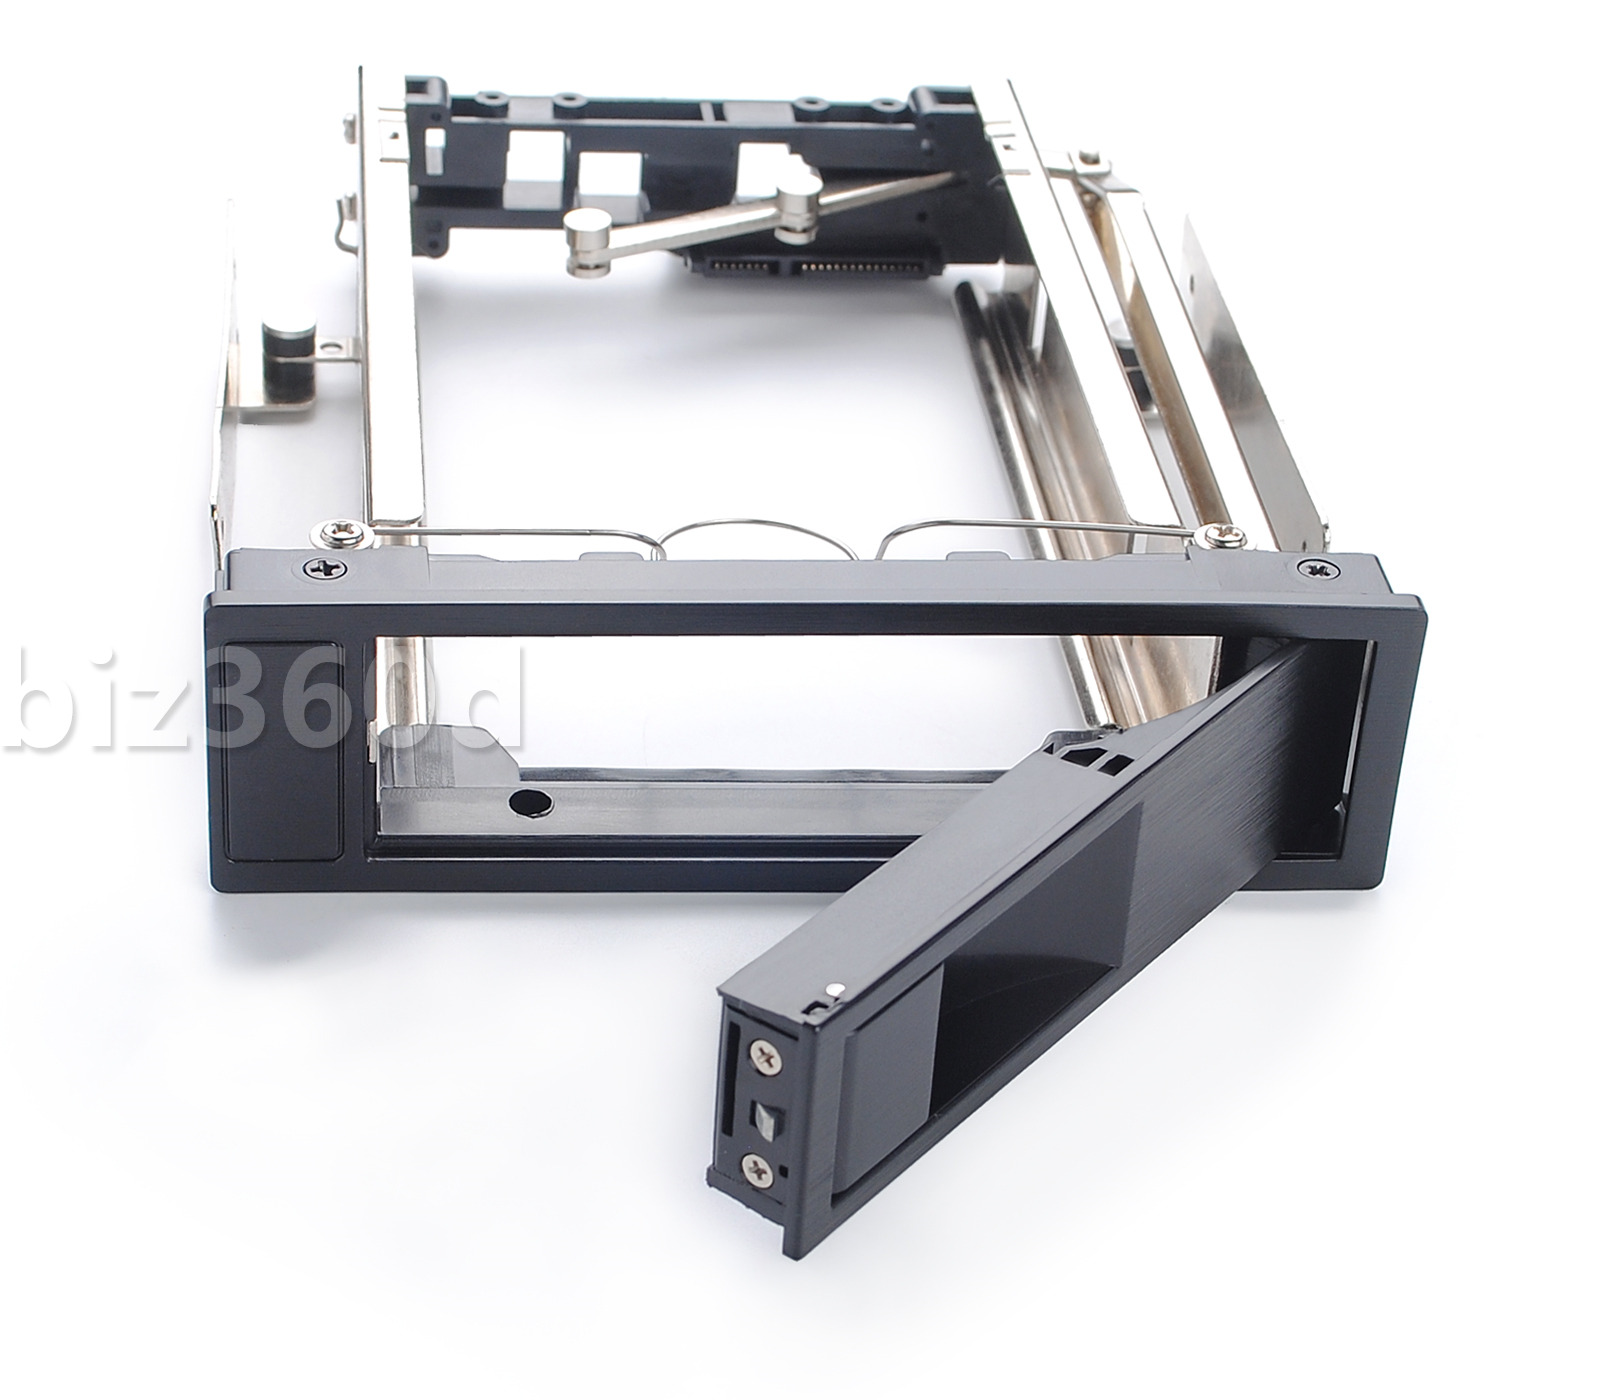 Single Bay Internal SATA Tray-Less Hot Swap Mobile Rack for 3.5” SSD/HDD